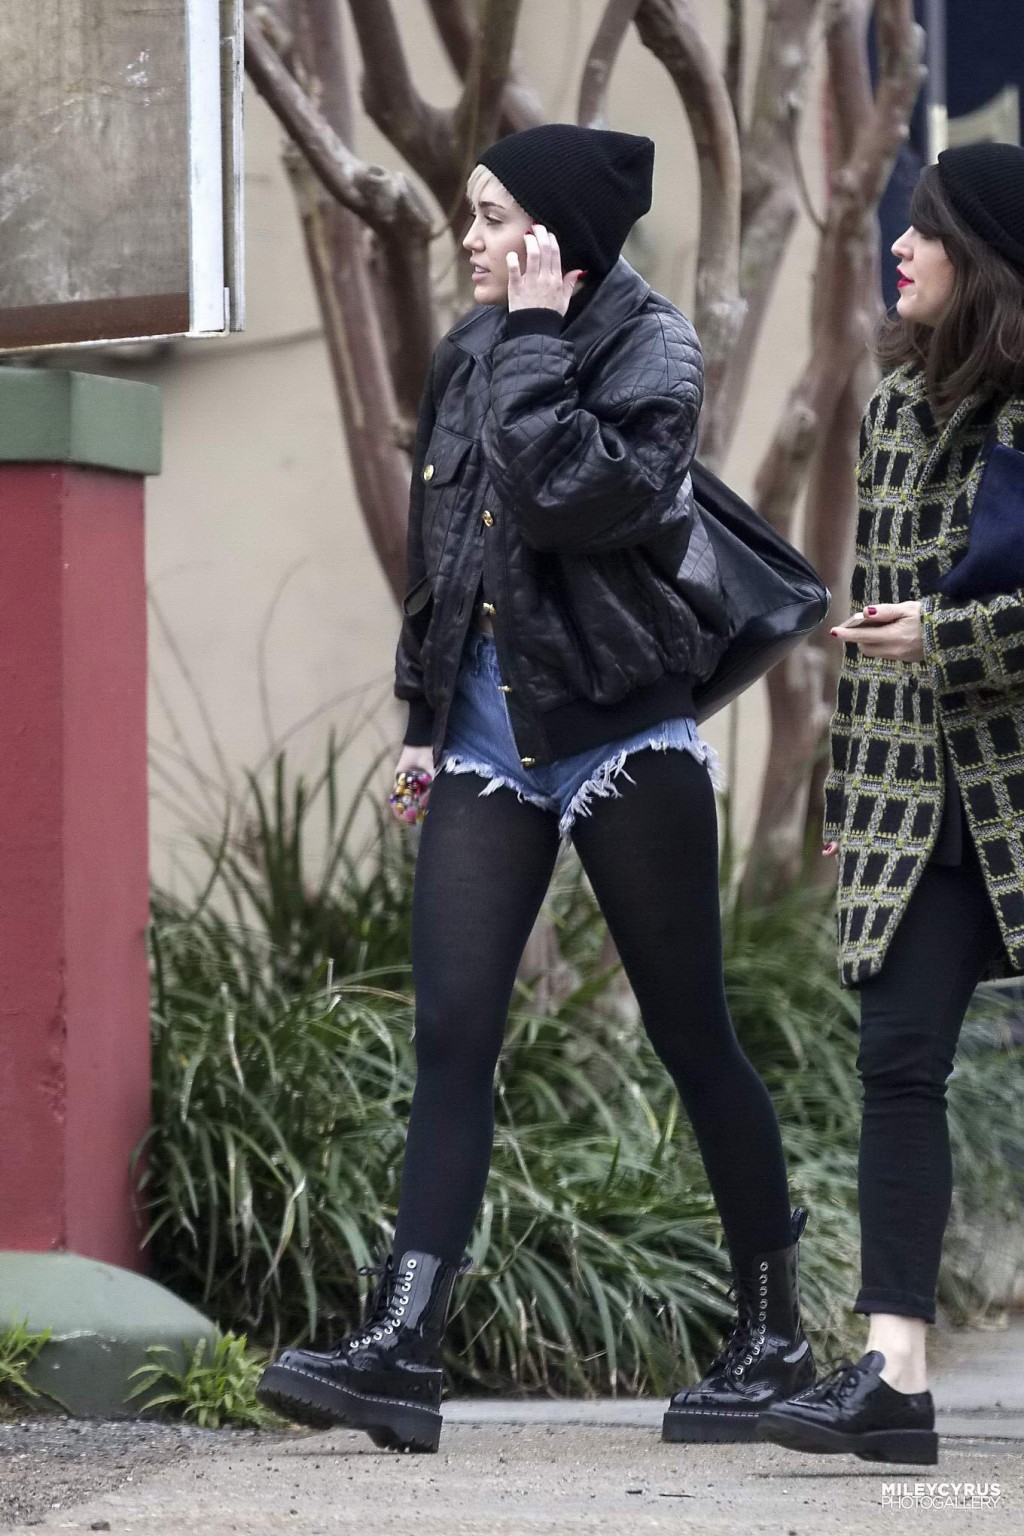 Miley Cyrus shows off her legs and ass wearing the denim shorts  black pantyhose #75201666